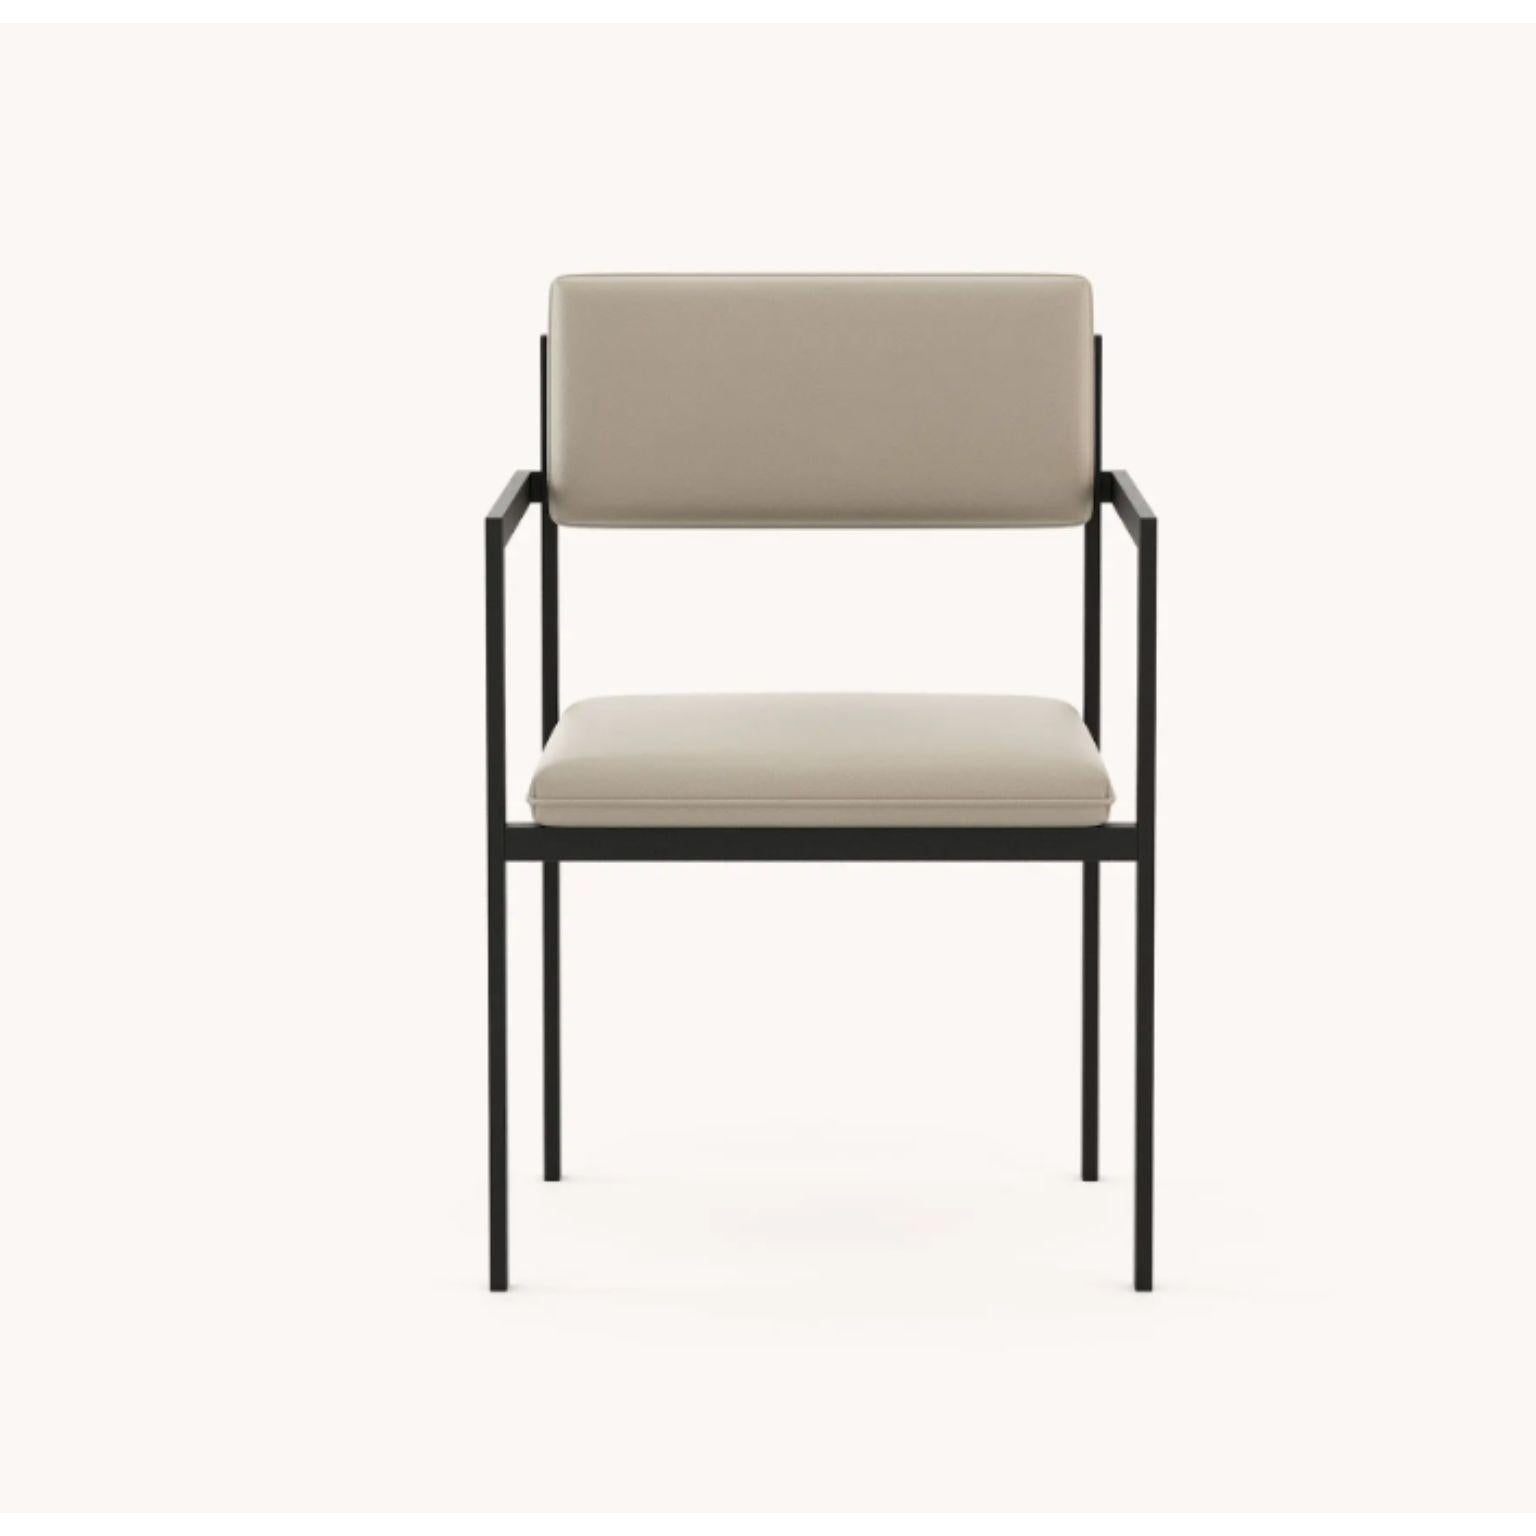 Post-Modern Bondi Chair with Armrest by Domkapa For Sale